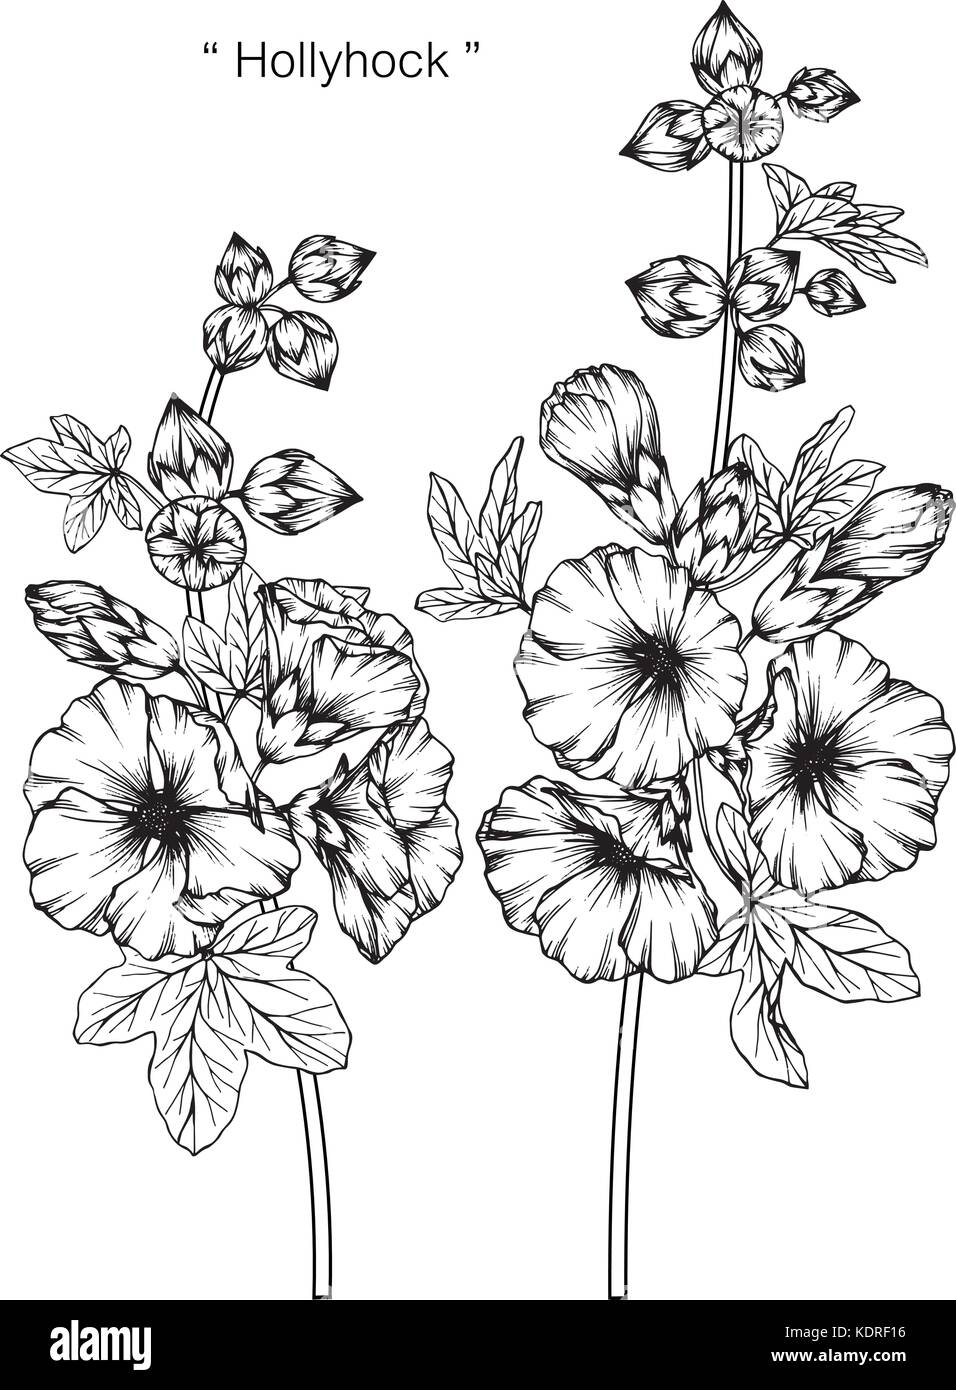 Hollyhock flower drawing  illustration. Black and white with line art. Stock Vector